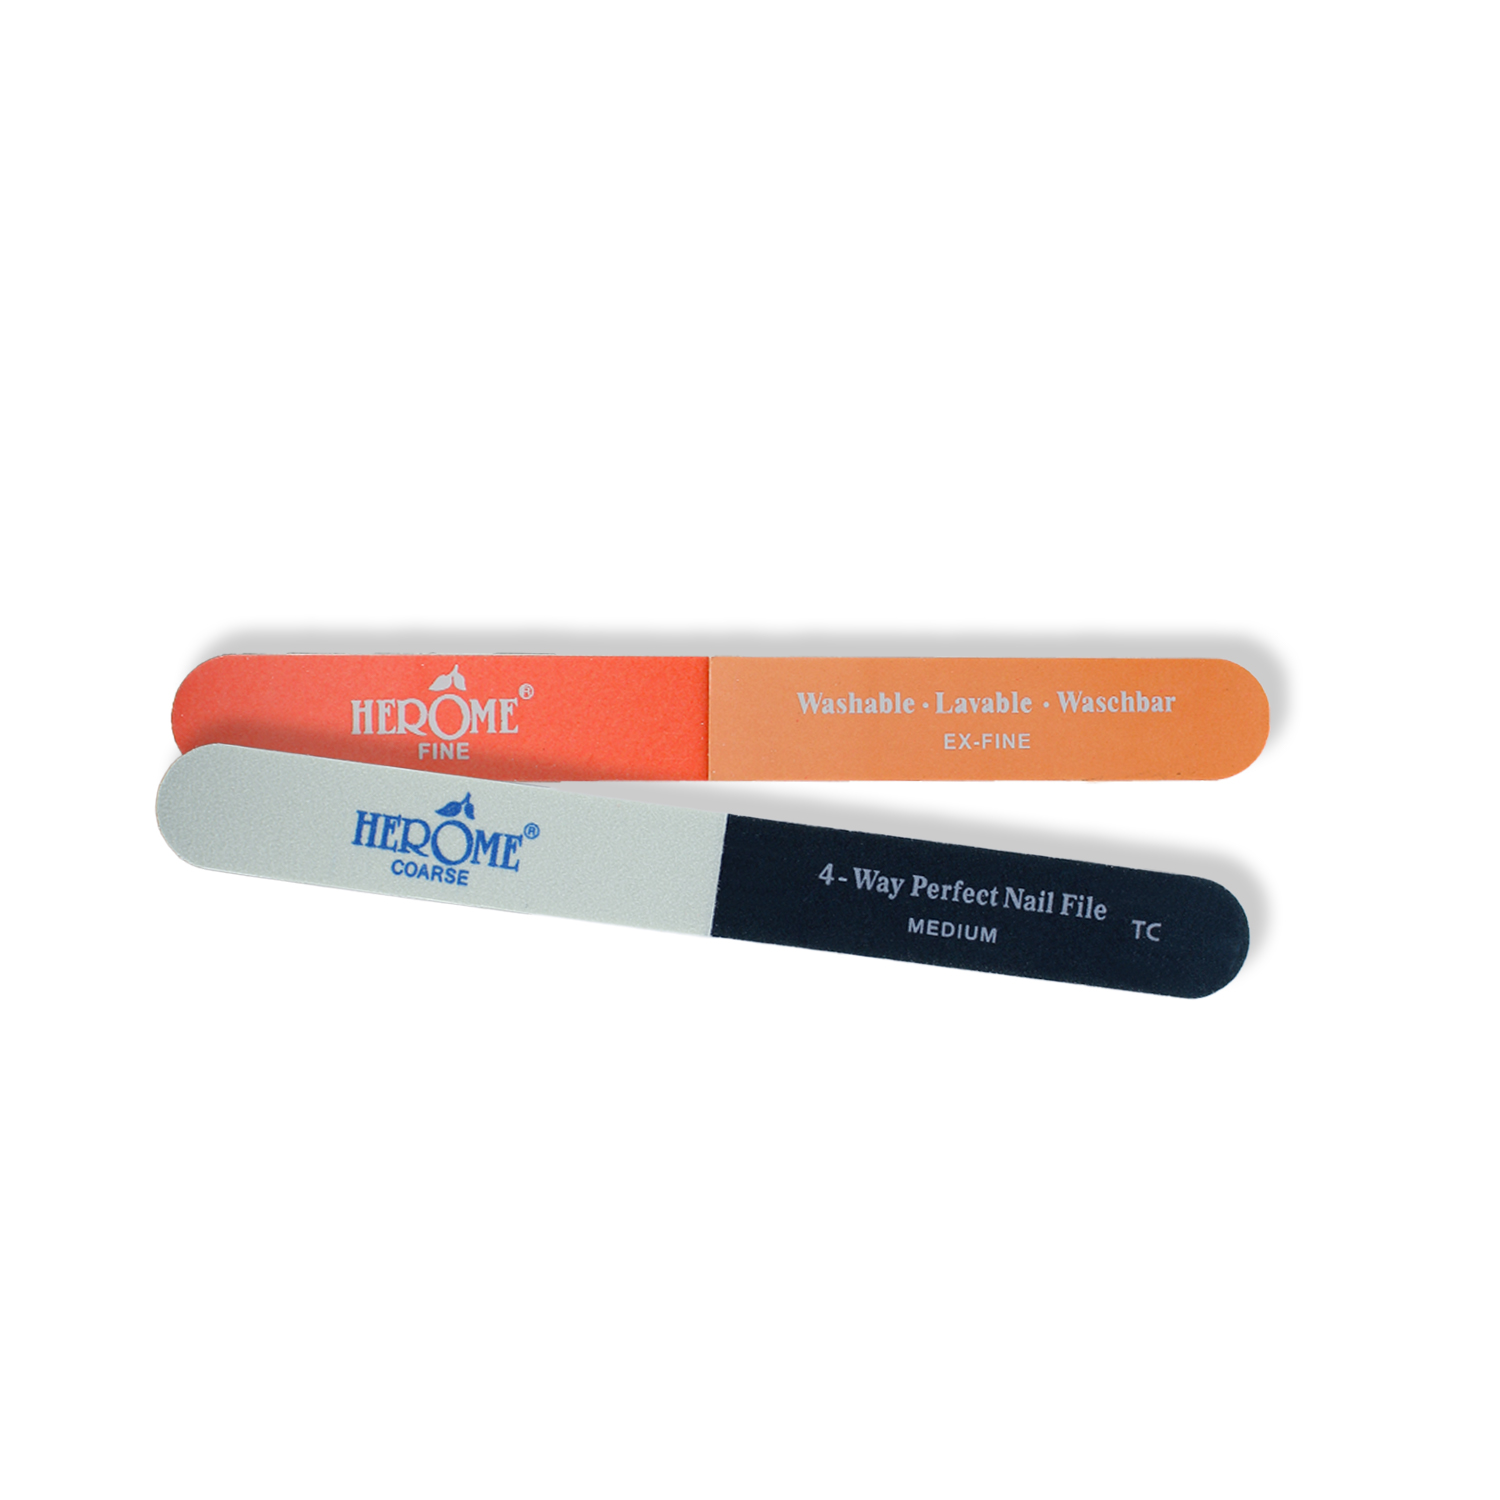 Herôme 4-Way Perfect Nail File (Nagelfeile) 1er